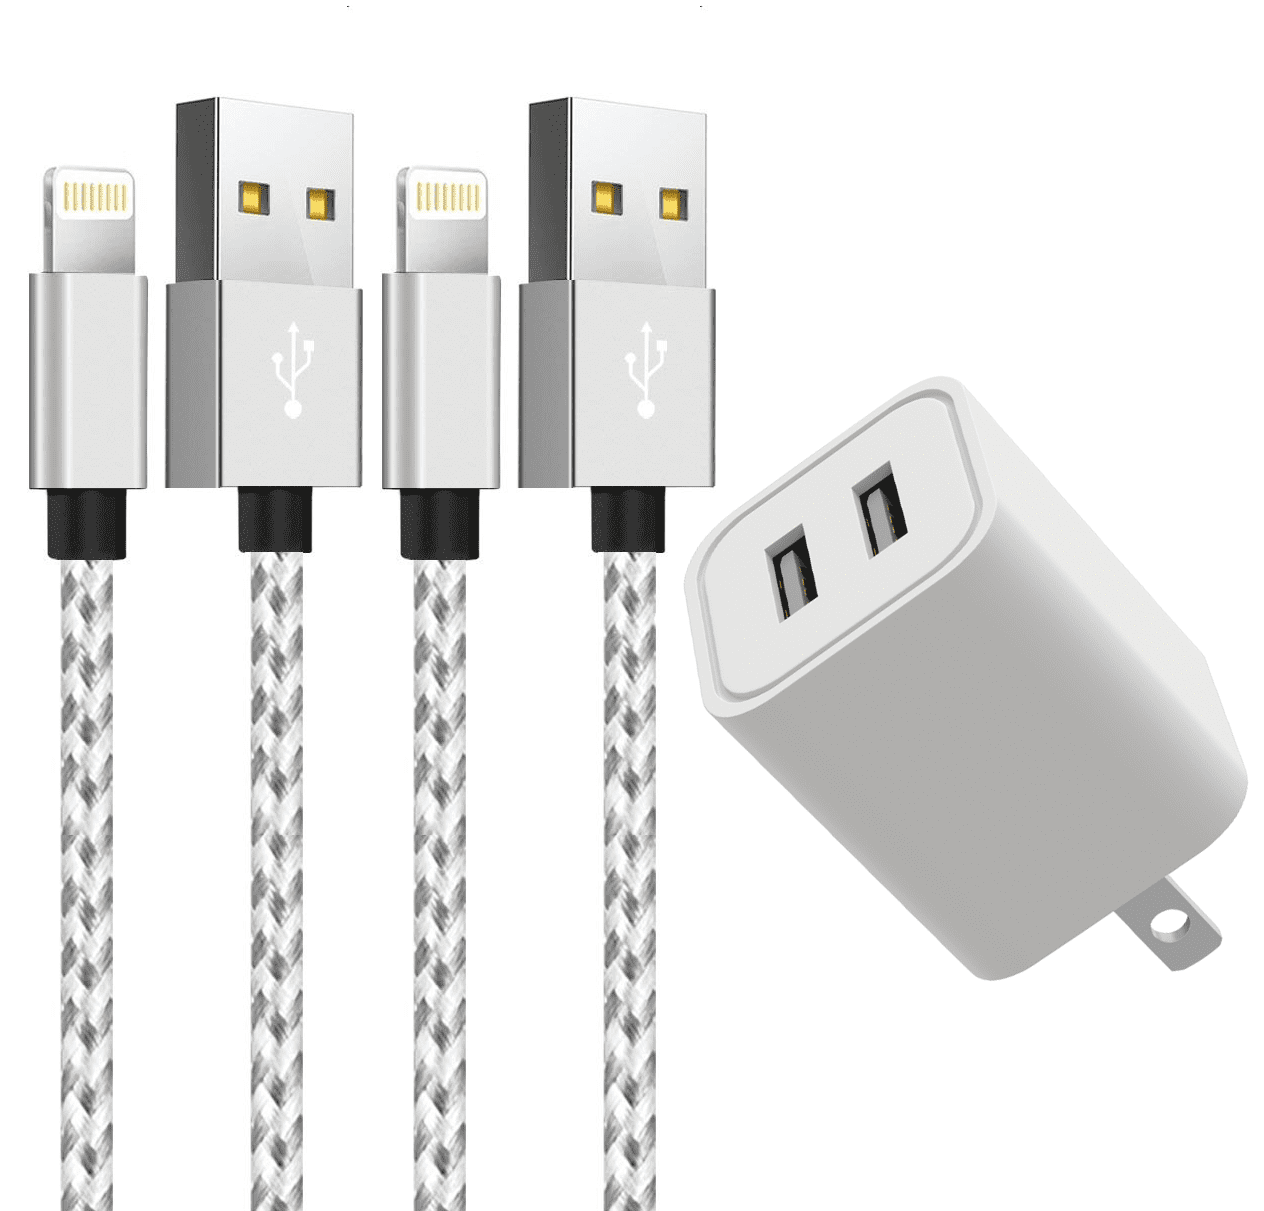 Authentic Short Two 8inch USB Type-C Cable Works with Lenovo ZUK Z2 Pro Also Fast Quick Charges Plus Data Transfer! White+Black 